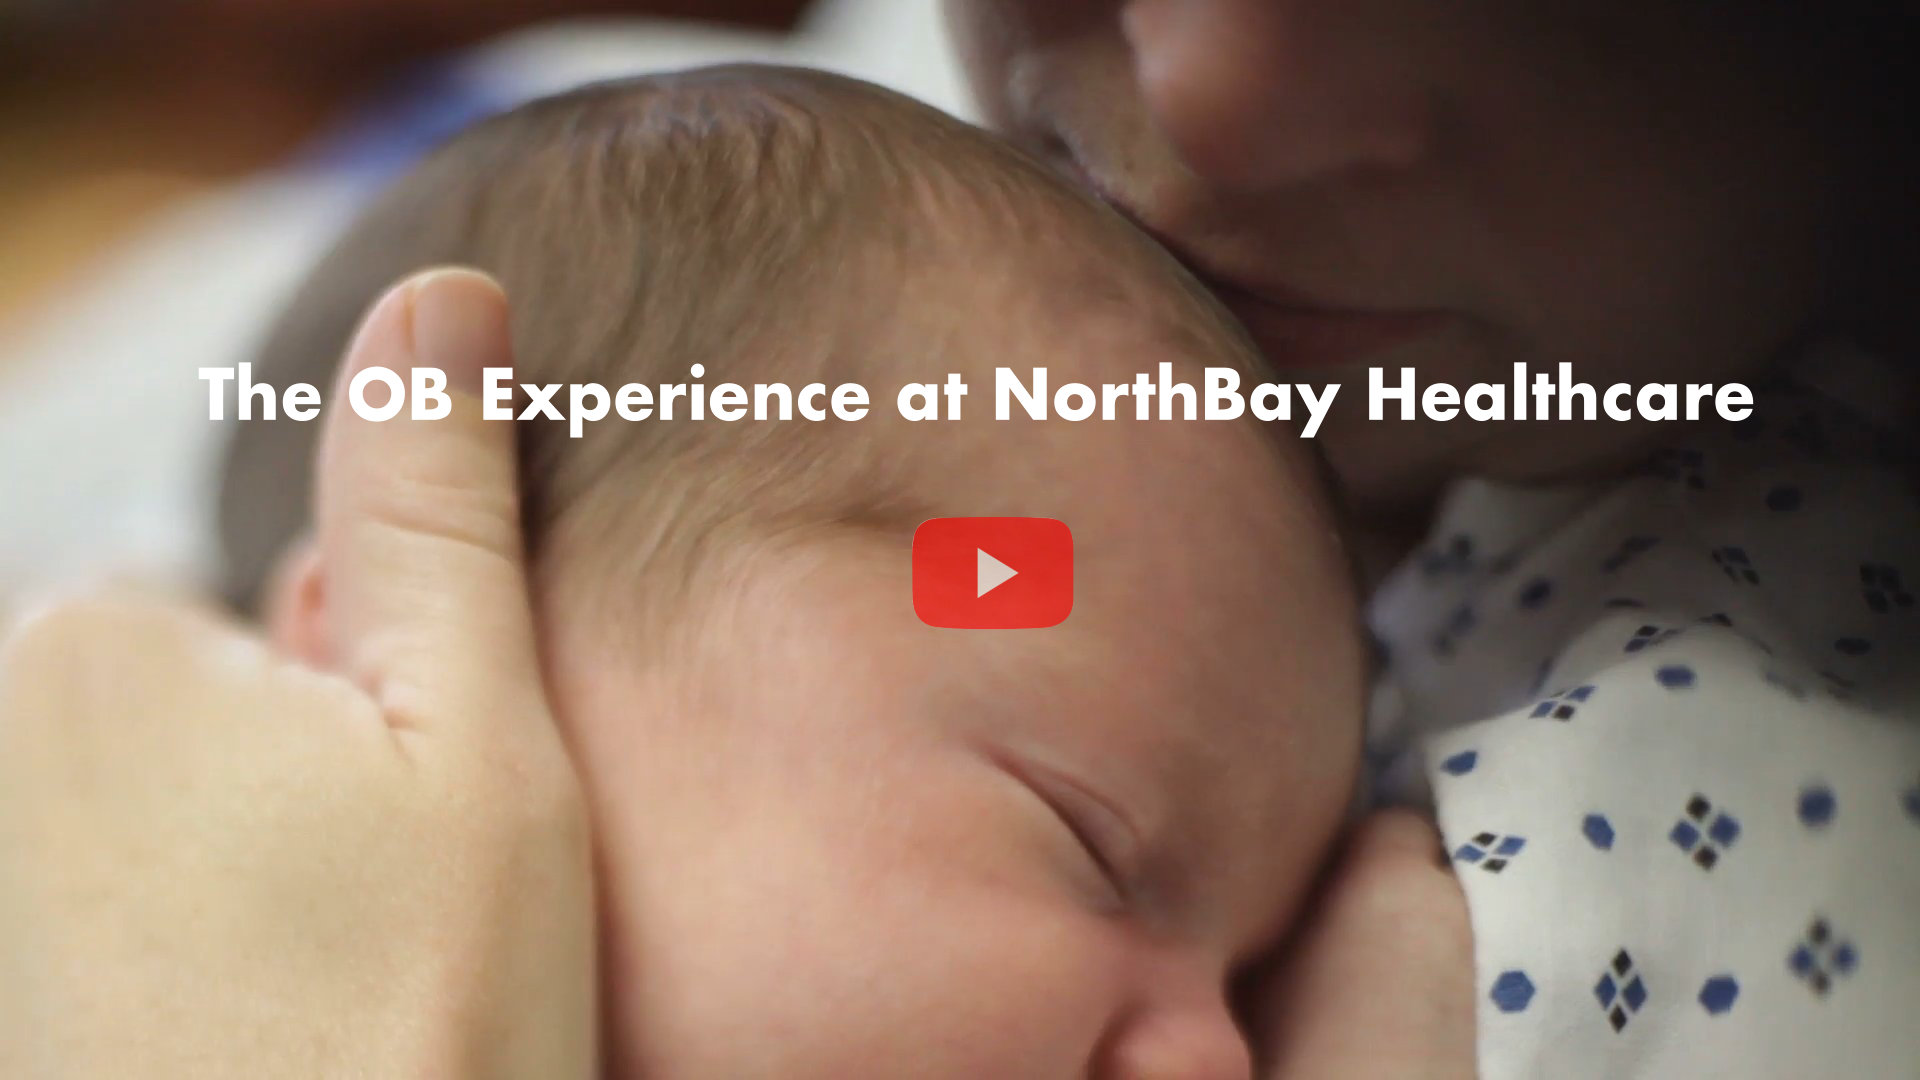 The OB Experience at NorthBay Healthcare